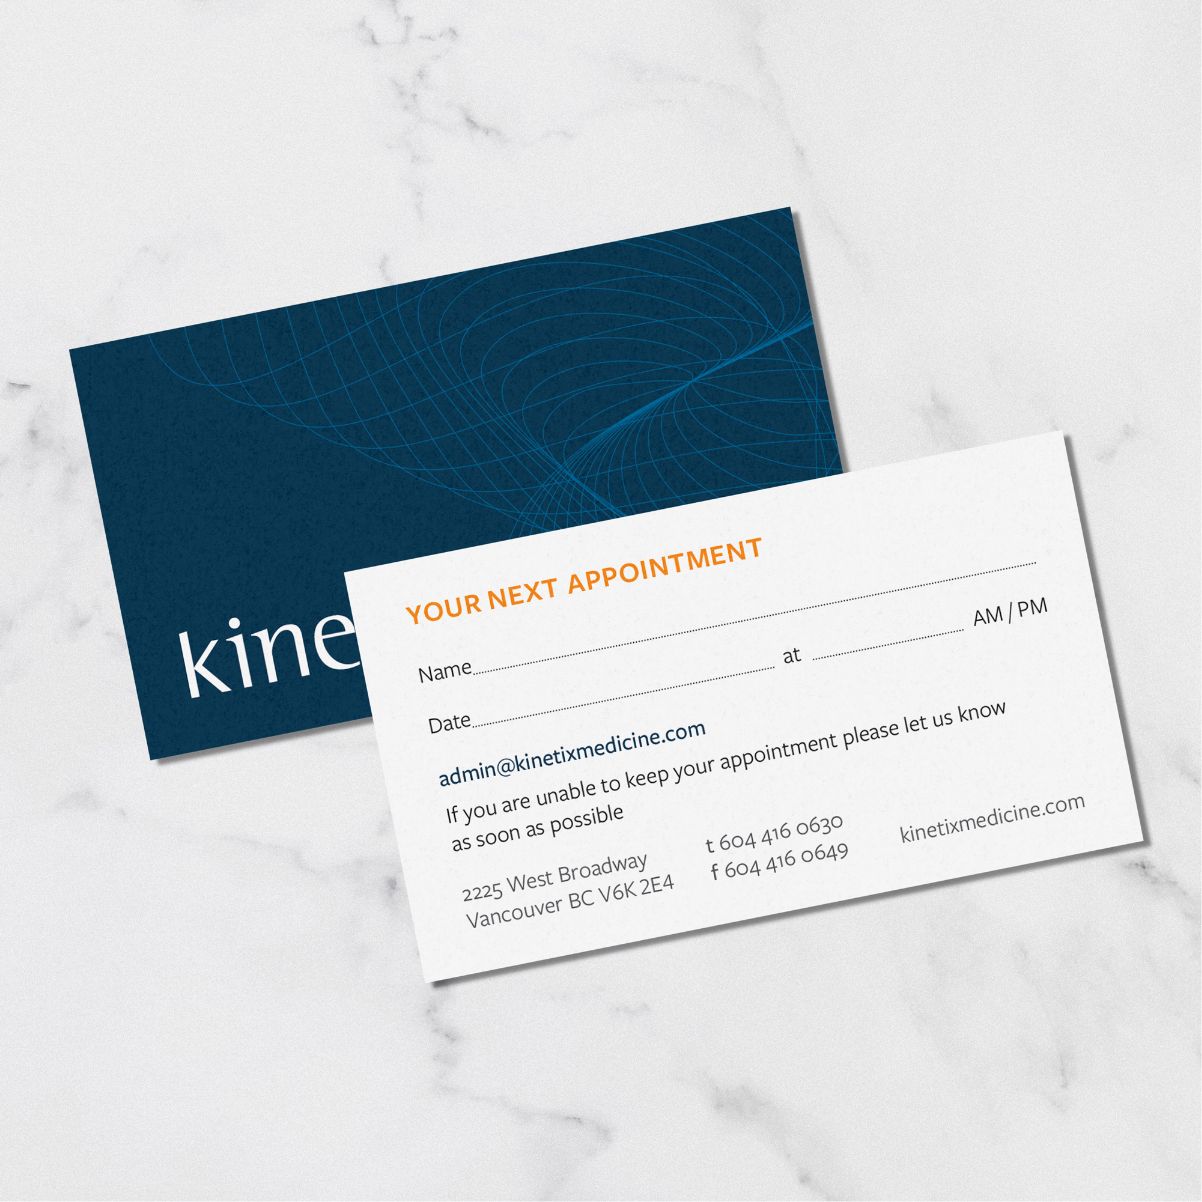 Kinetix: Integrated Orthopaedic Medicine Appointment Reminder Cards